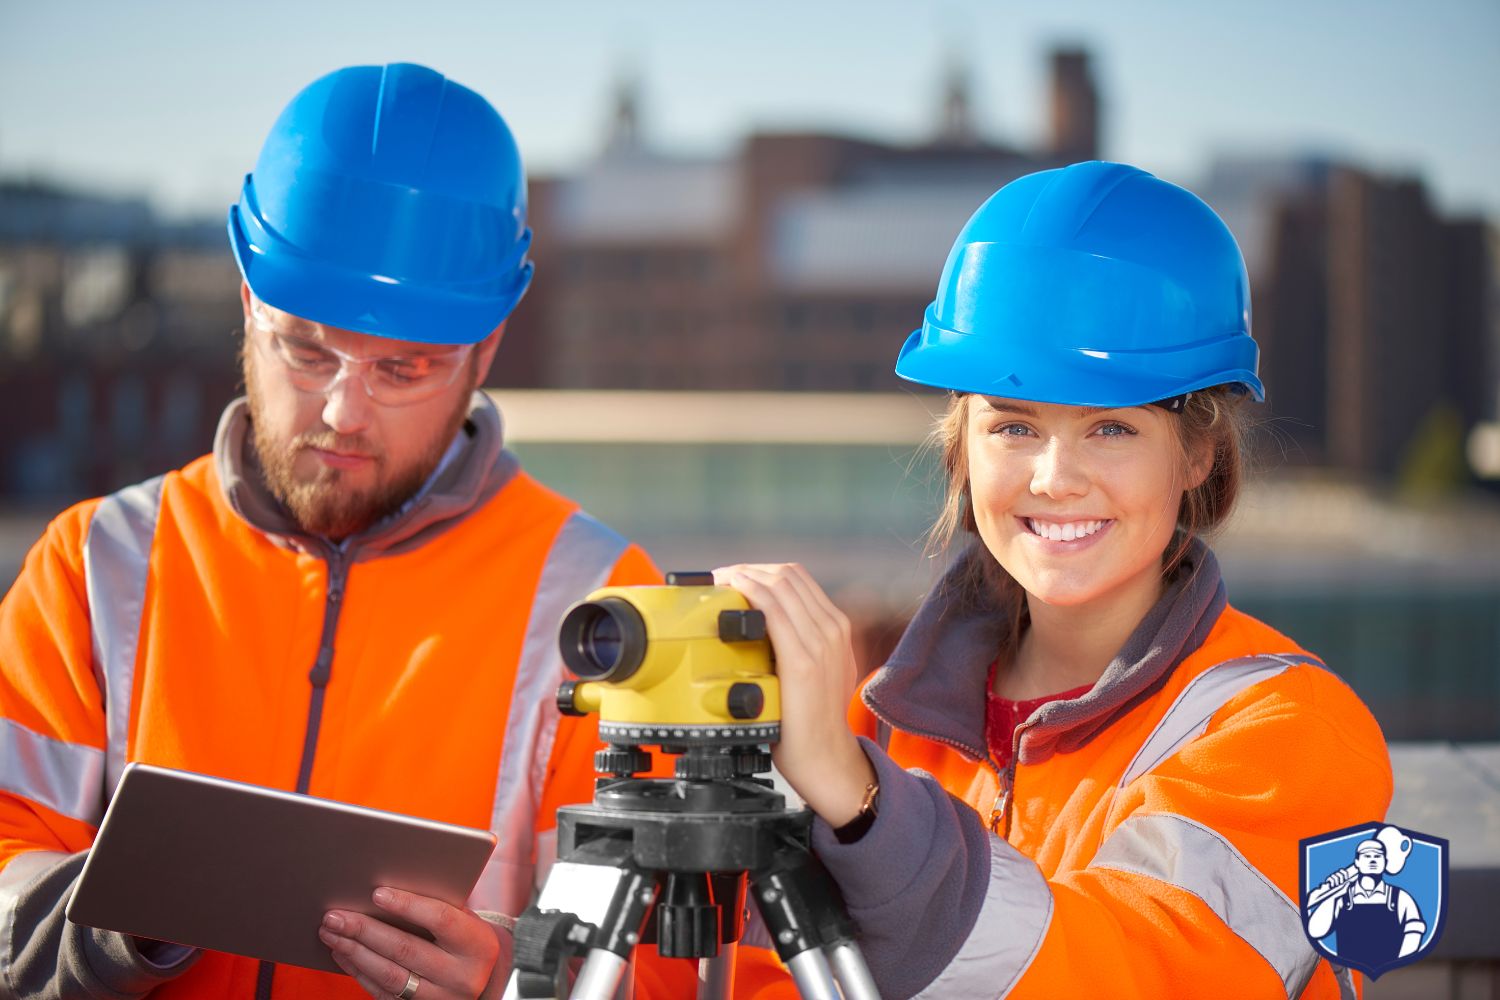 Hiring a quantity Surveyor for on-site valuations